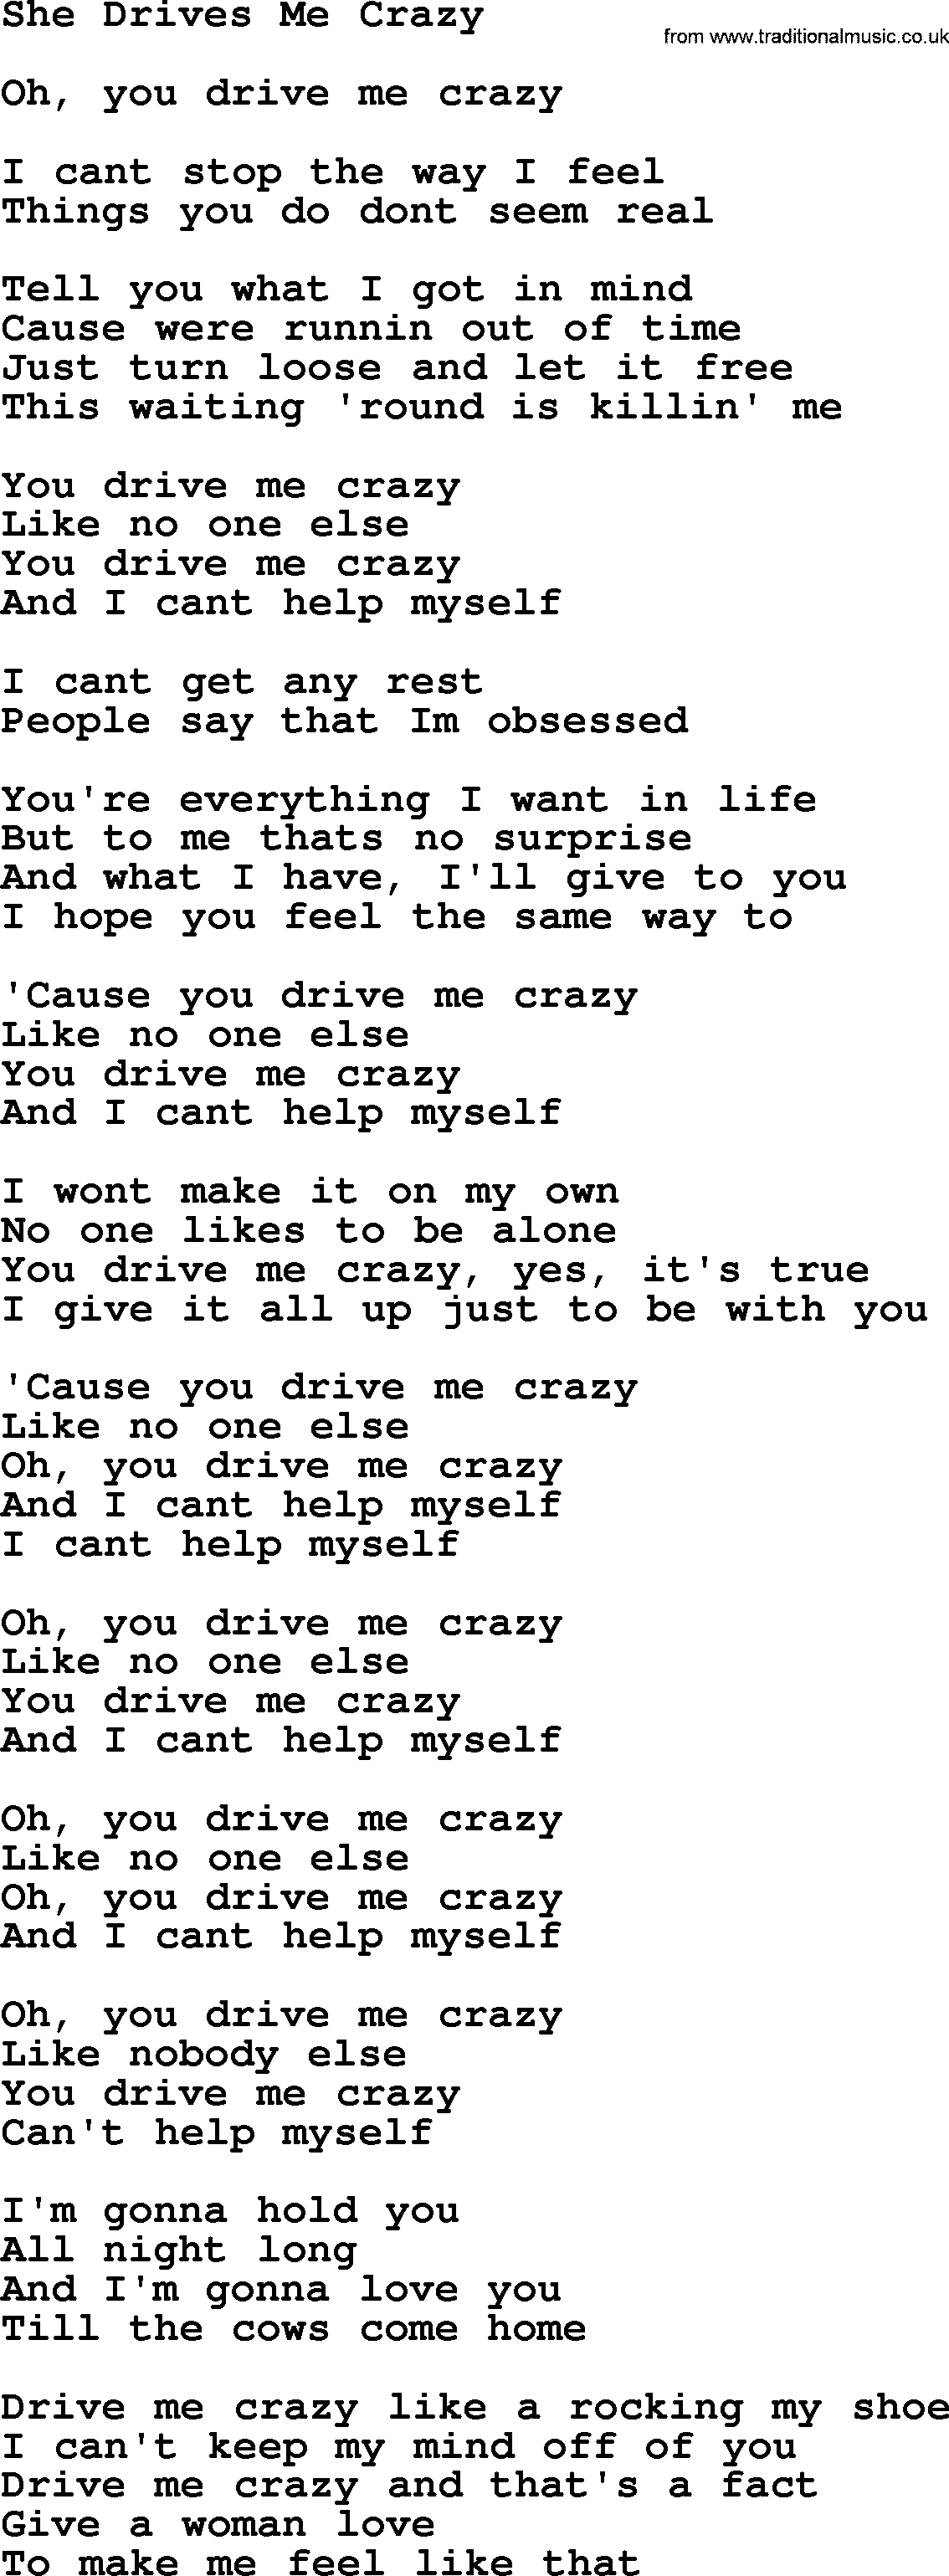 Dolly Parton Song She Drives Me Crazy Lyrics Brian the lyrics are great! traditional music library